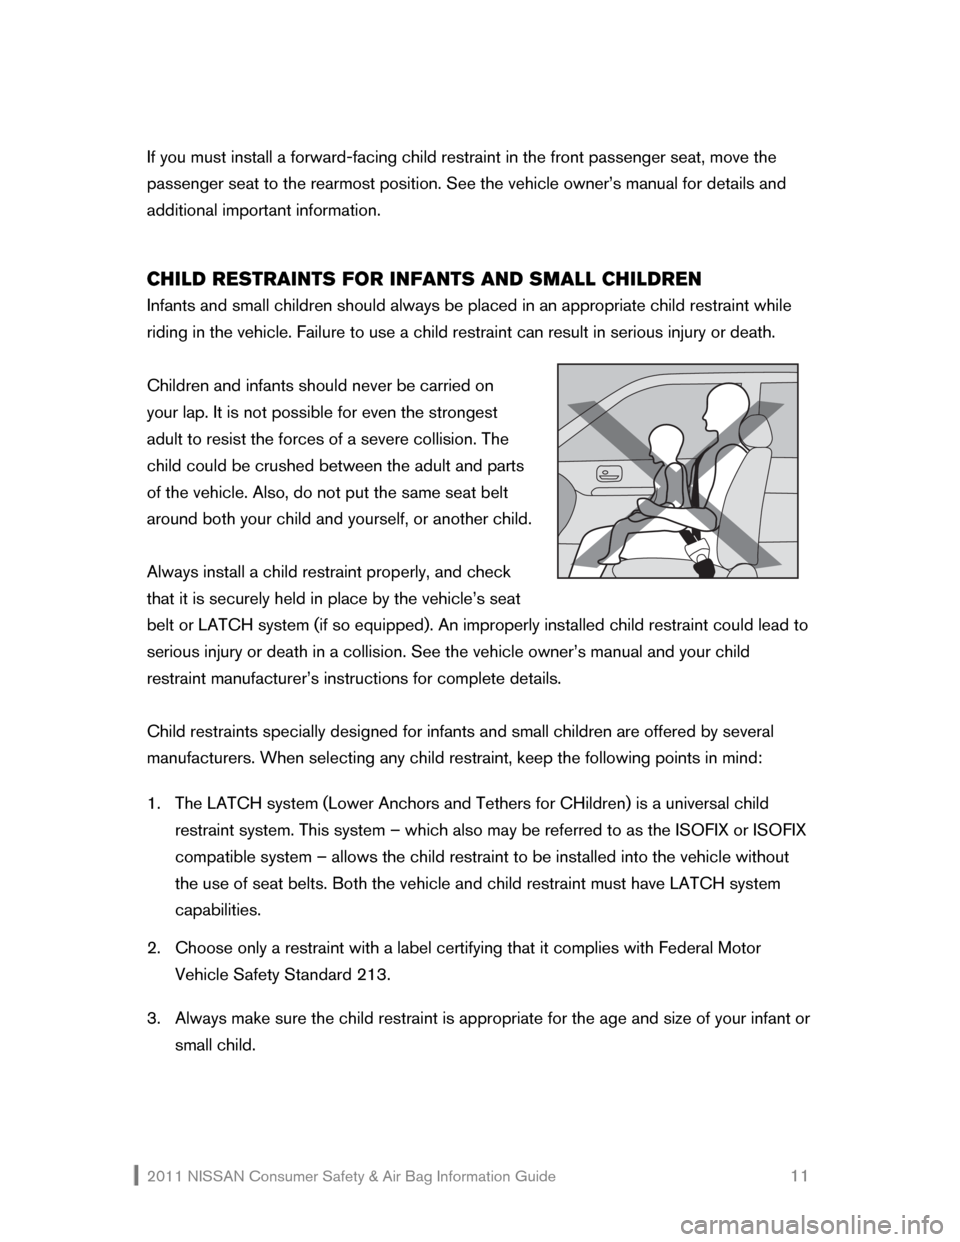 NISSAN XTERRA 2011 N50 / 2.G Consumer Safety Air Bag Information Guide 2011 NISSAN Consumer Safety & Air Bag Information Guide                                                       11 
If you must install a forward-facing child restraint in the front passenger seat, move